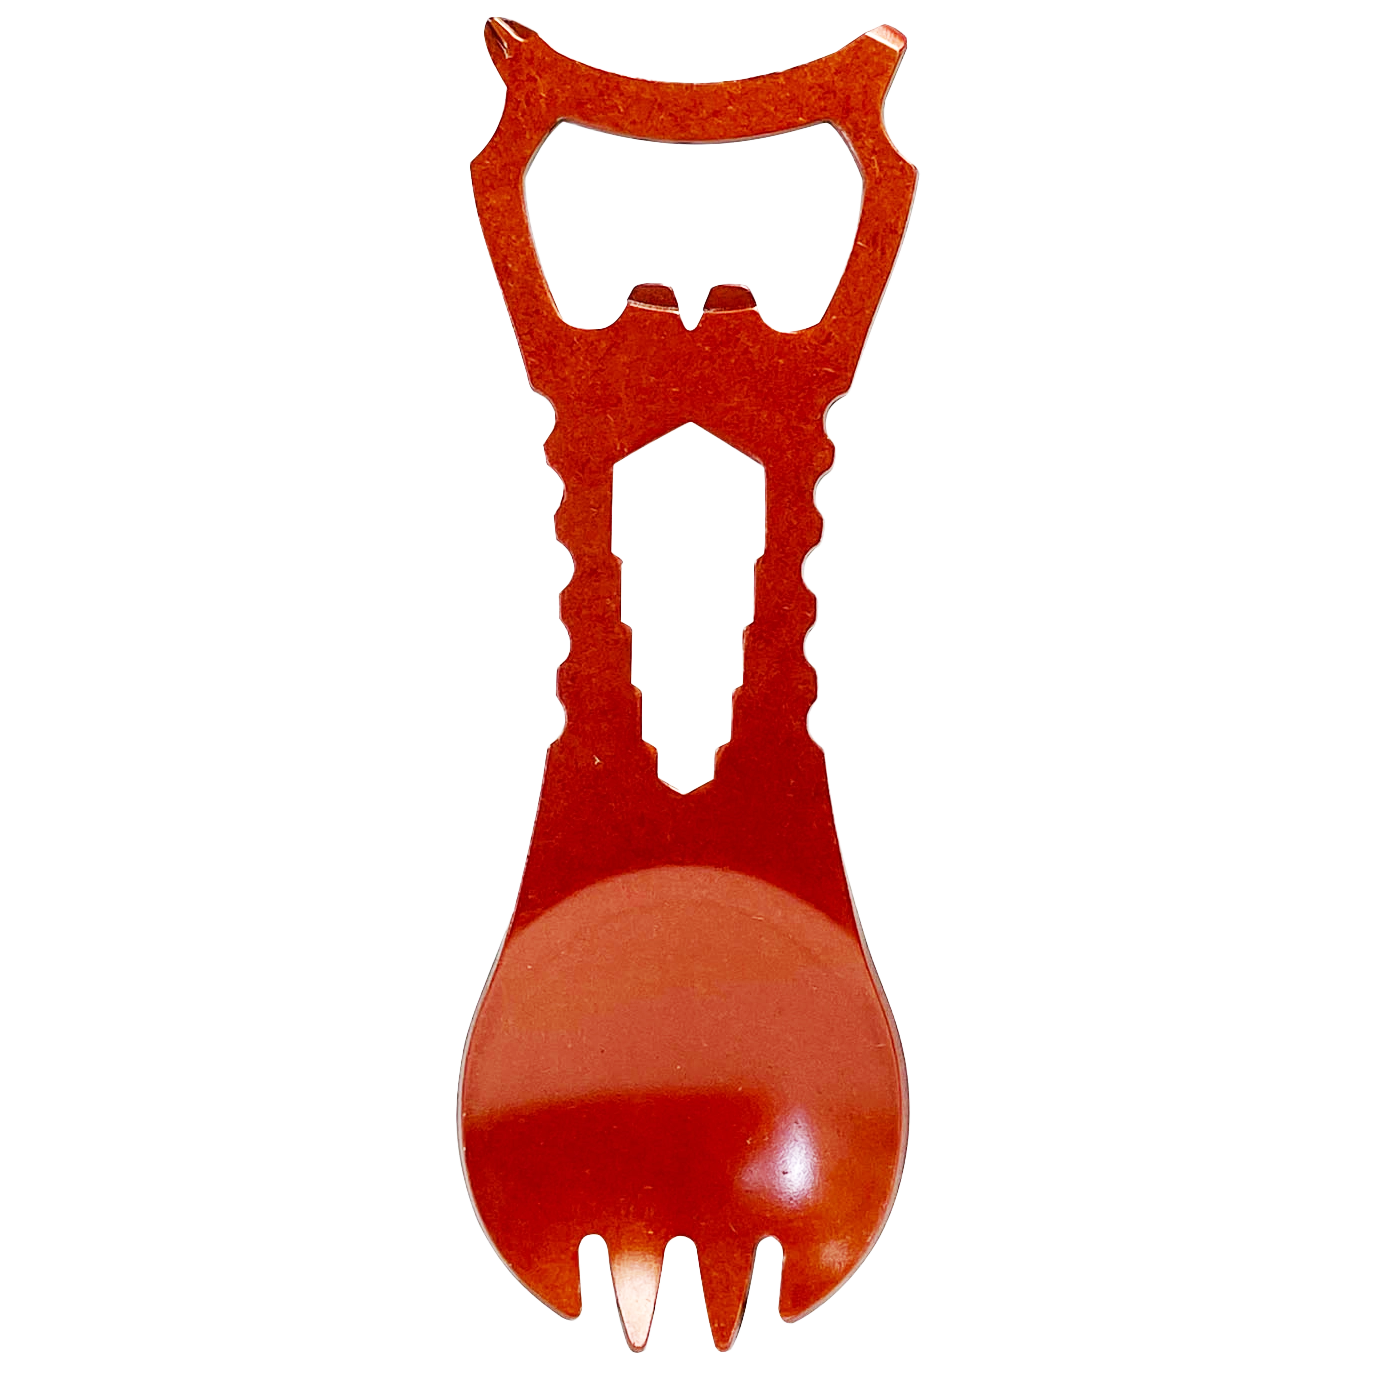 "Owl Spork" Camping Cookware and Multifunction Tool Stainless steel construction with orange plated finish